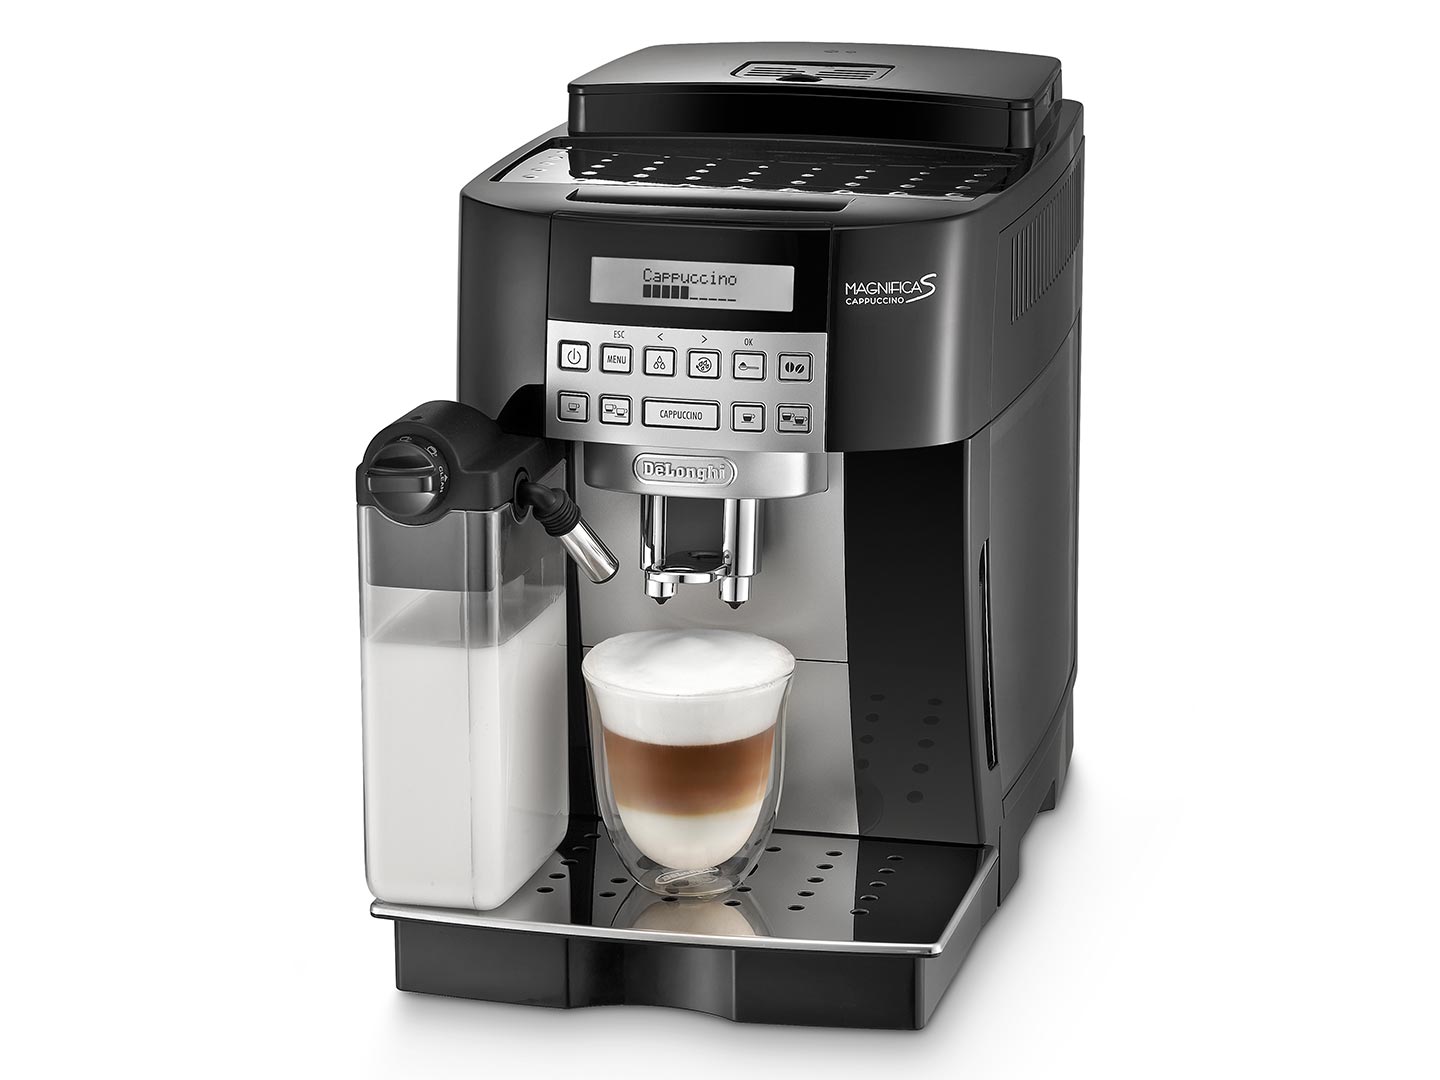 Magnifica S Smart not making long coffees : r/DeLonghi